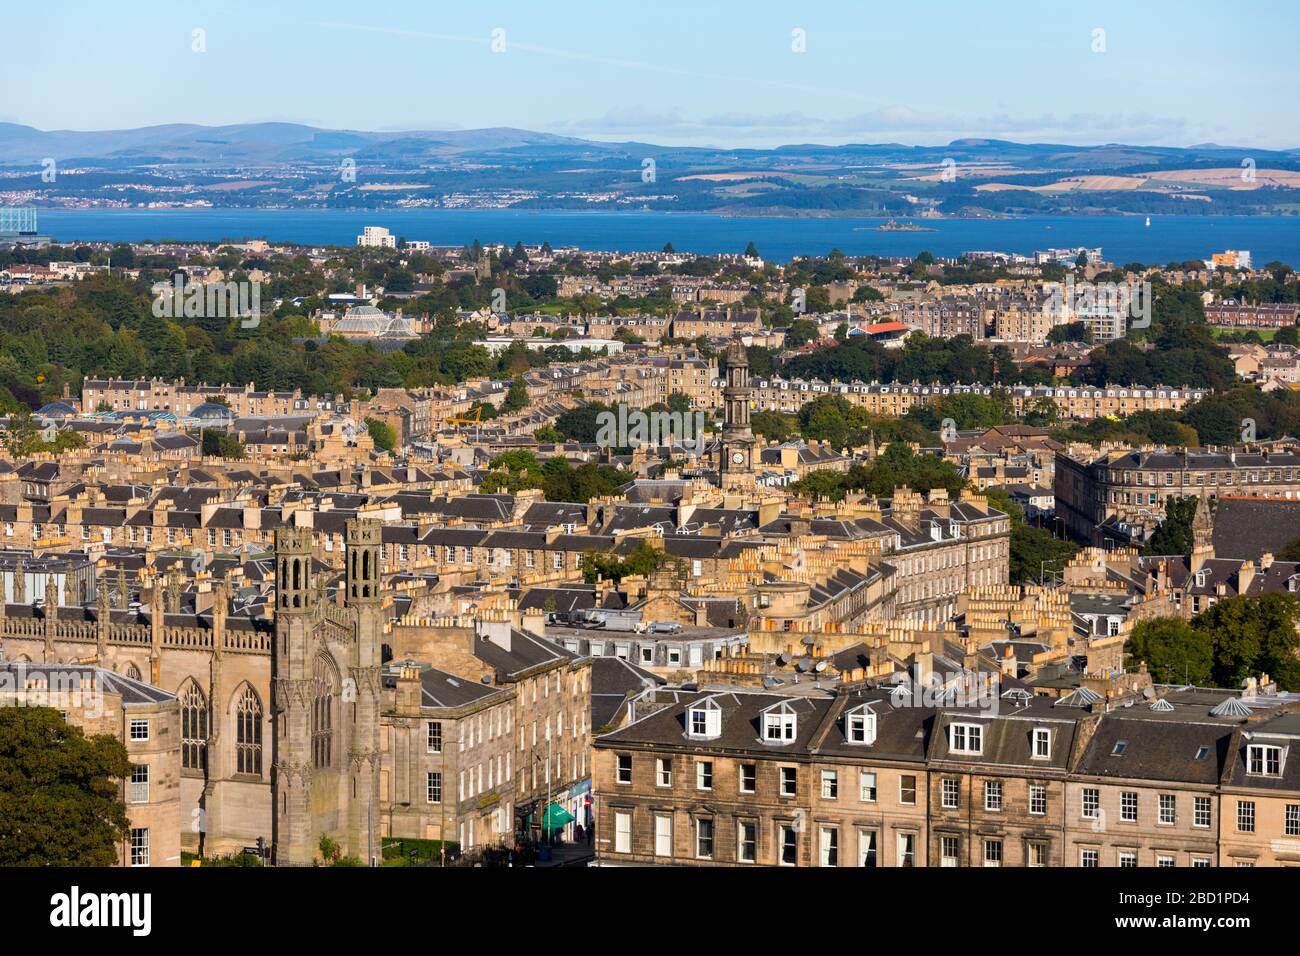 Vue panoramique sur New Town et Firth of Forth, Edimbourg, Ecosse, Royaume-Uni, Europe Banque D'Images